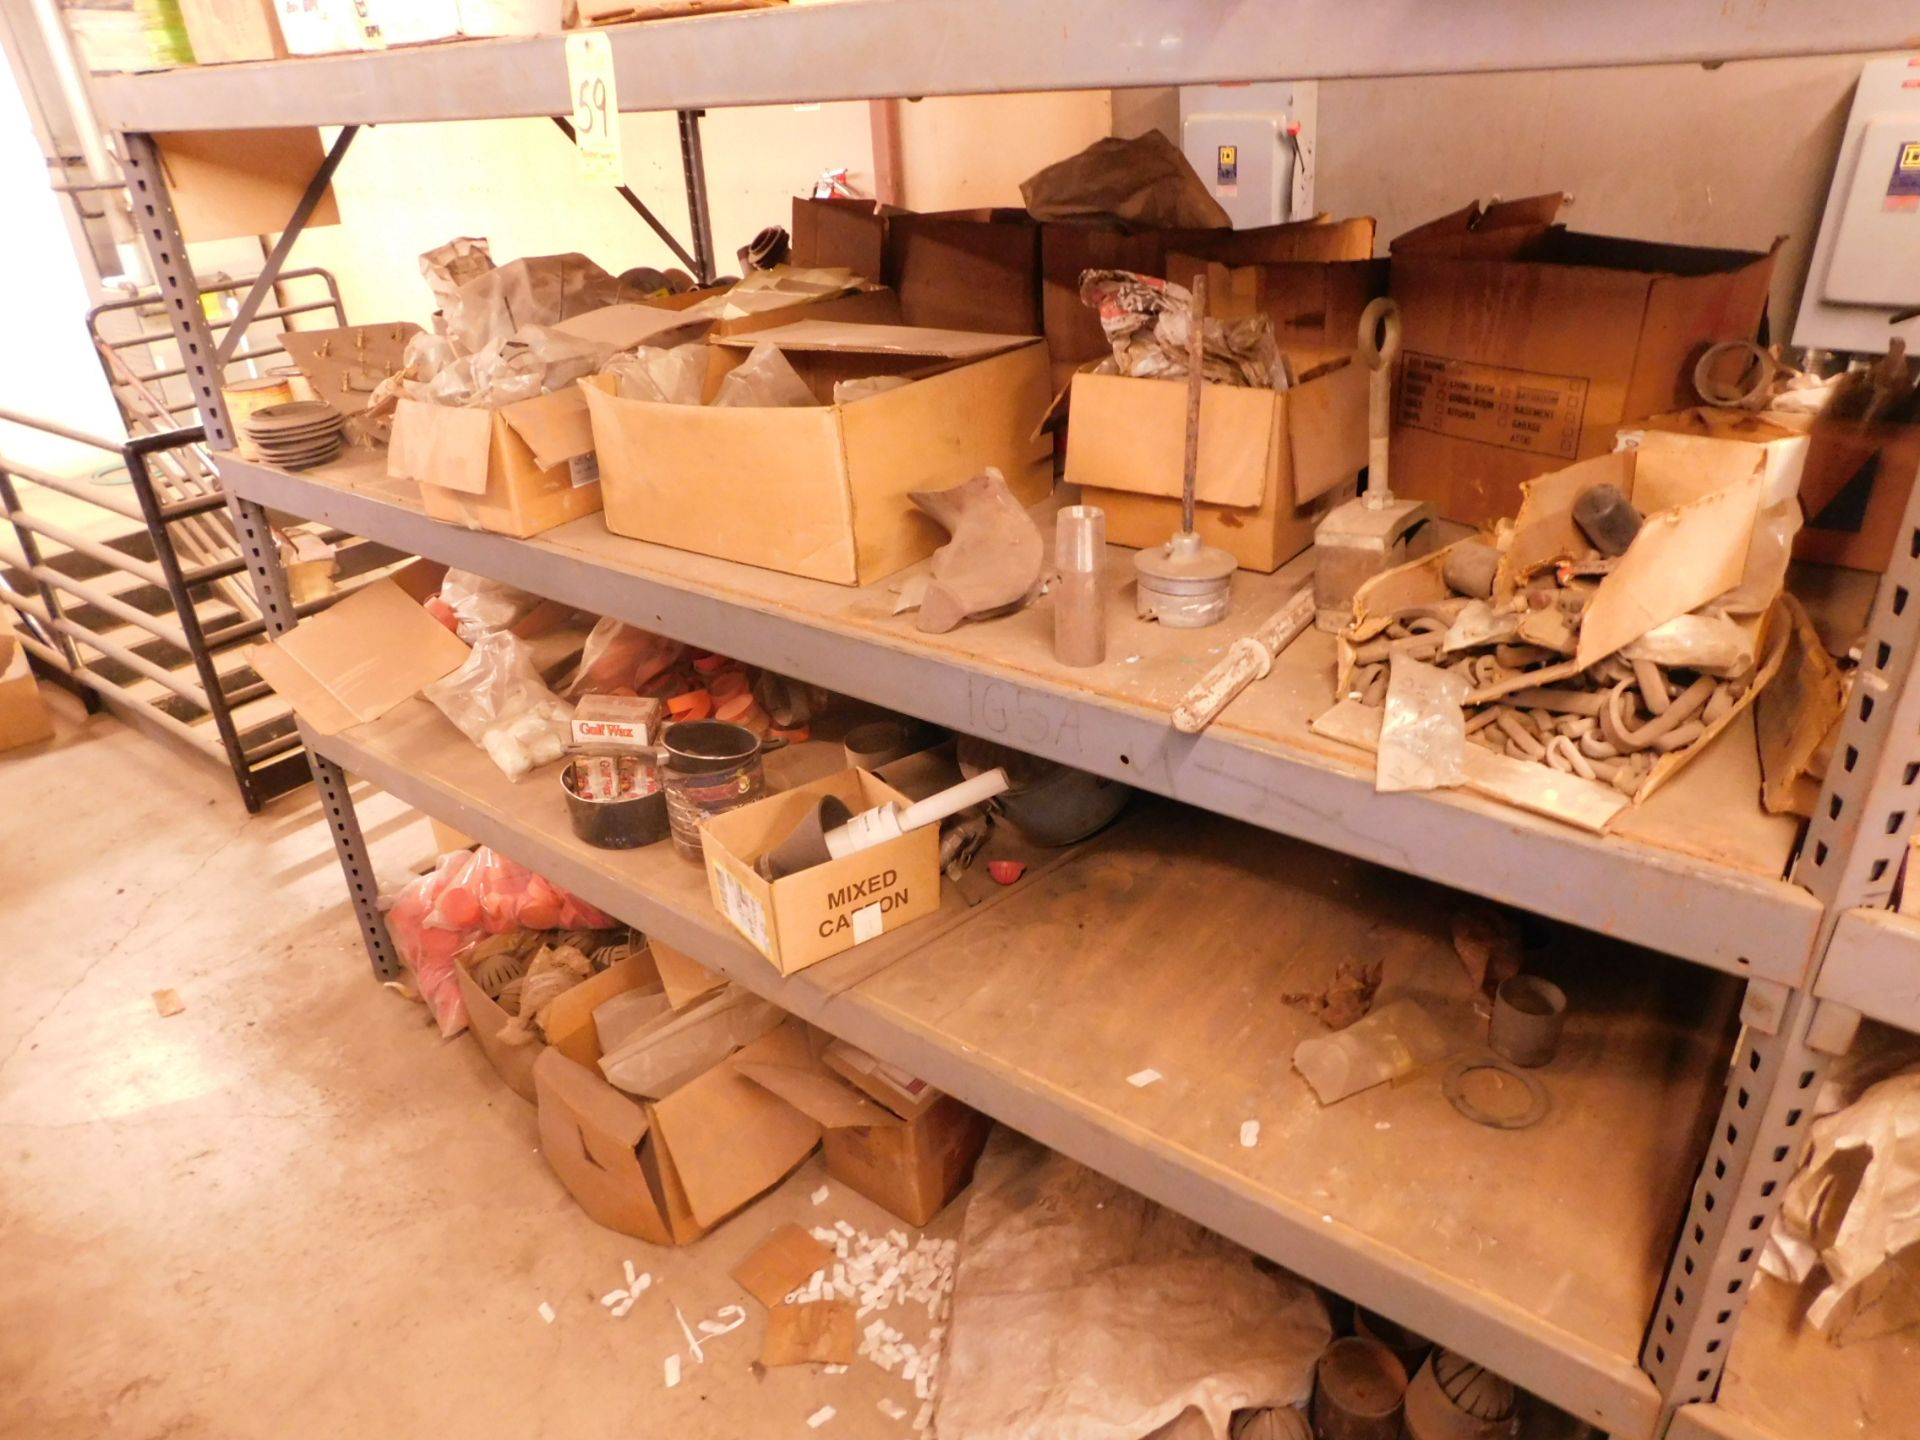 Contents of (1) Bay of Pallet Shelving